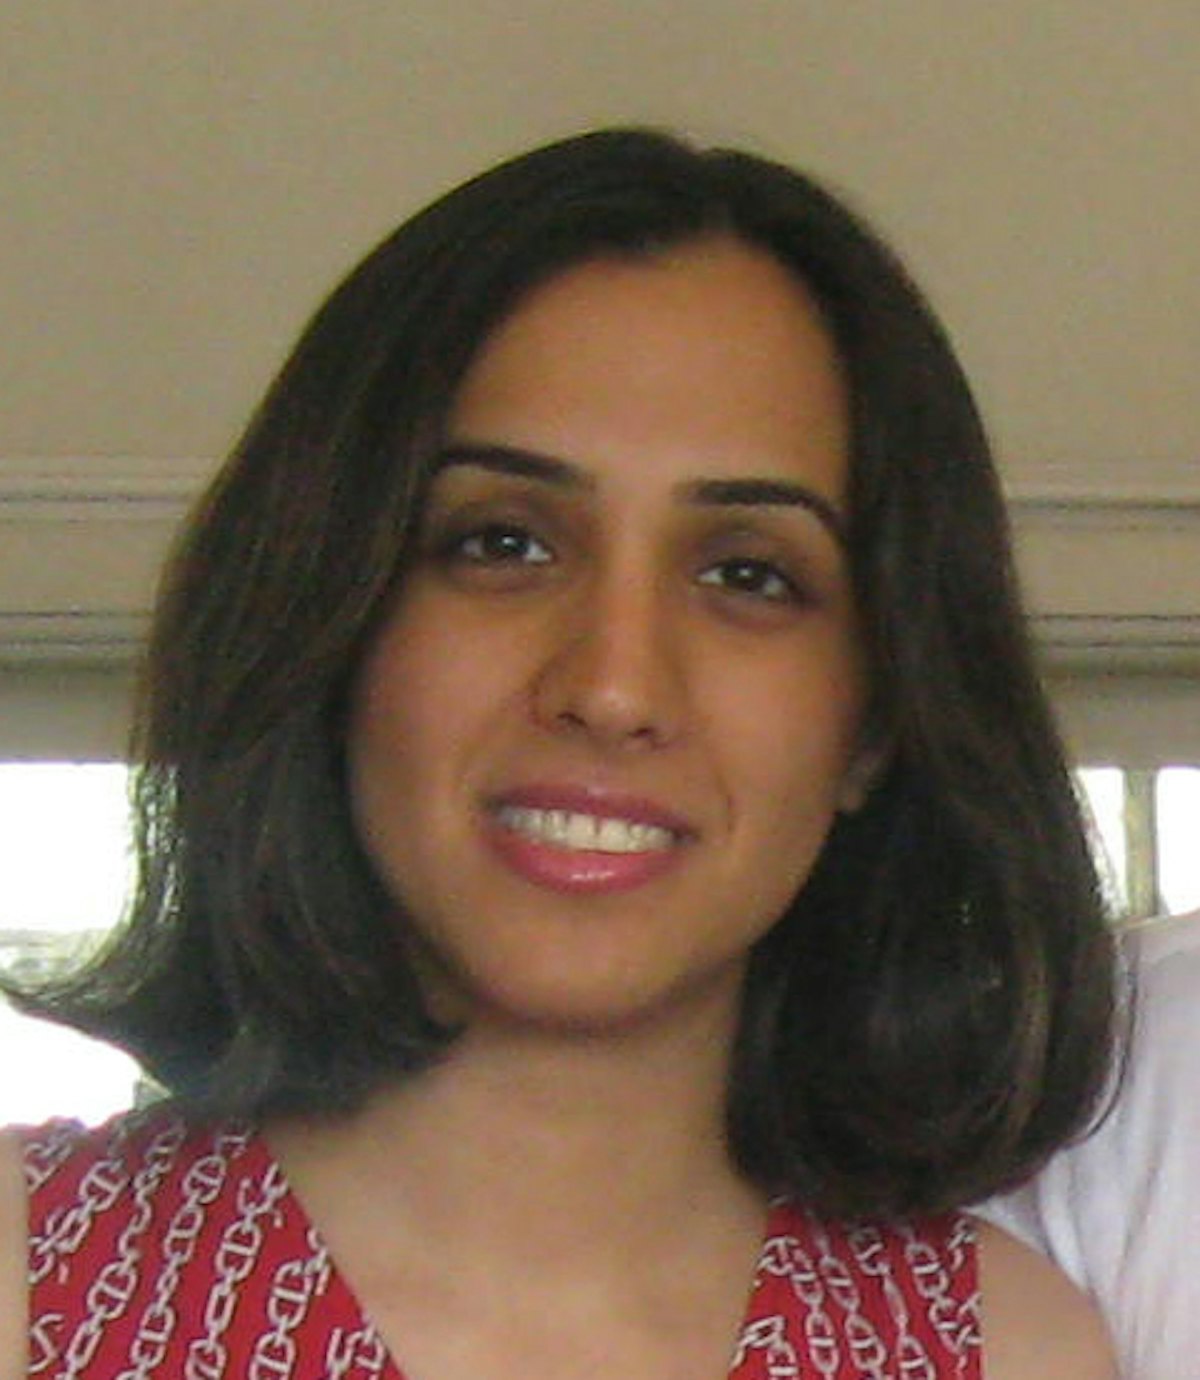 Haleh Rouhi - pictured here before her arrest - was born in Shiraz in 1977. Although denied access to private university for being a Baha’i, she was able to obtain a law degree from the Baha'i Institute of Higher Education. For a time, she was employed at the Iran Radiator Company and served as a member of the Baha'i Youth Committee of Shiraz. Before her arrest, government agents often carried out surveillance on her home because of her Baha'i activities.